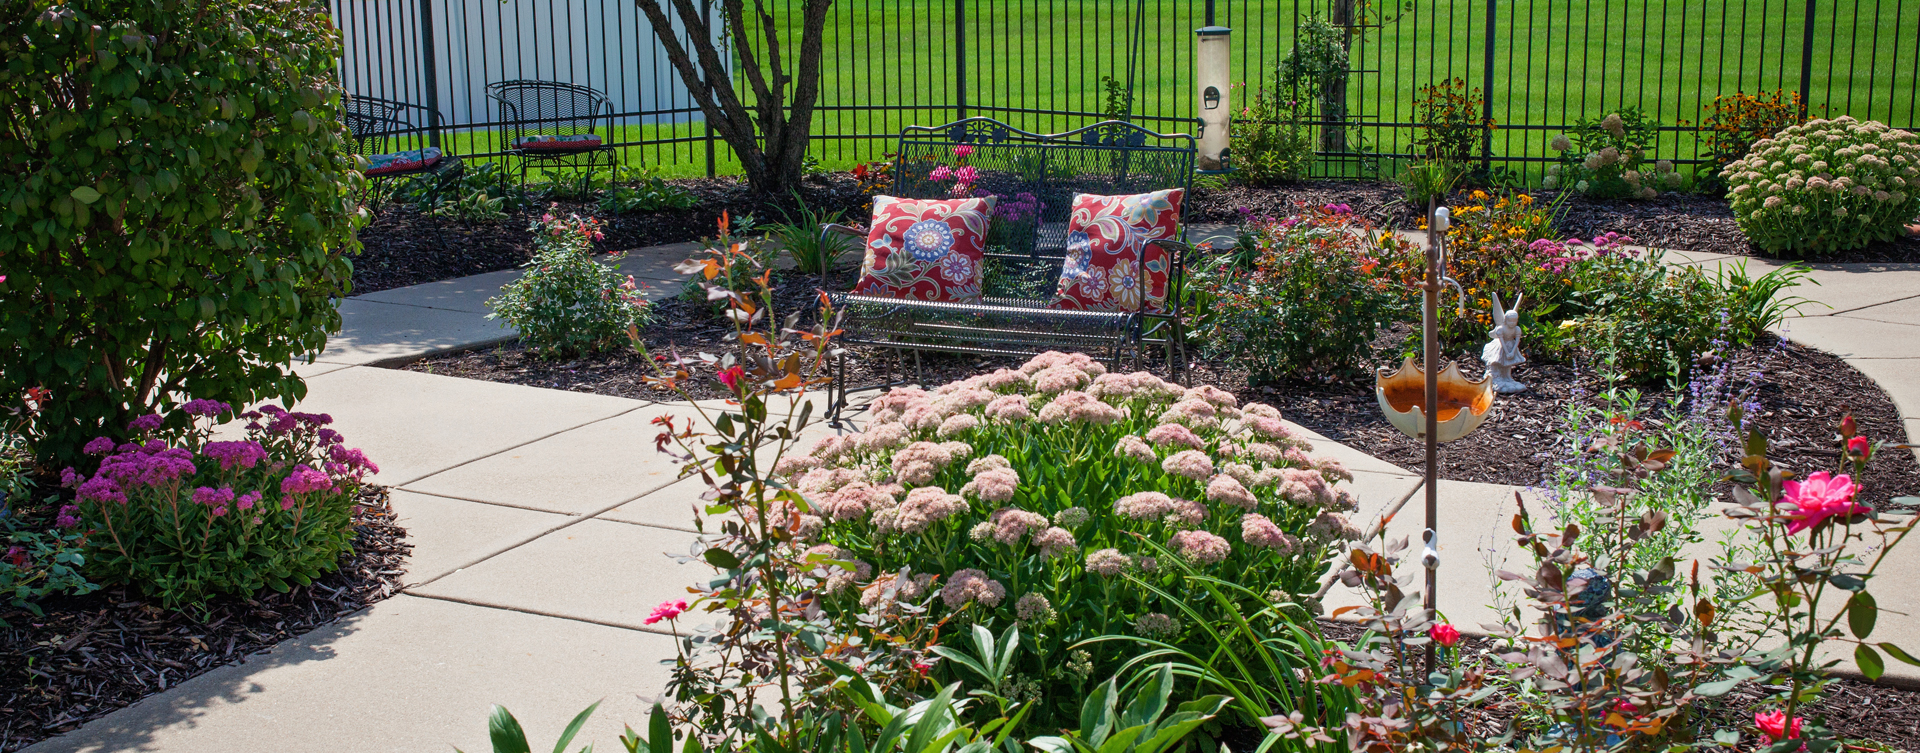 Residents with dementia can enjoy a traveling path, relaxed seating and raised garden beds in the courtyard at Bickford of Marion